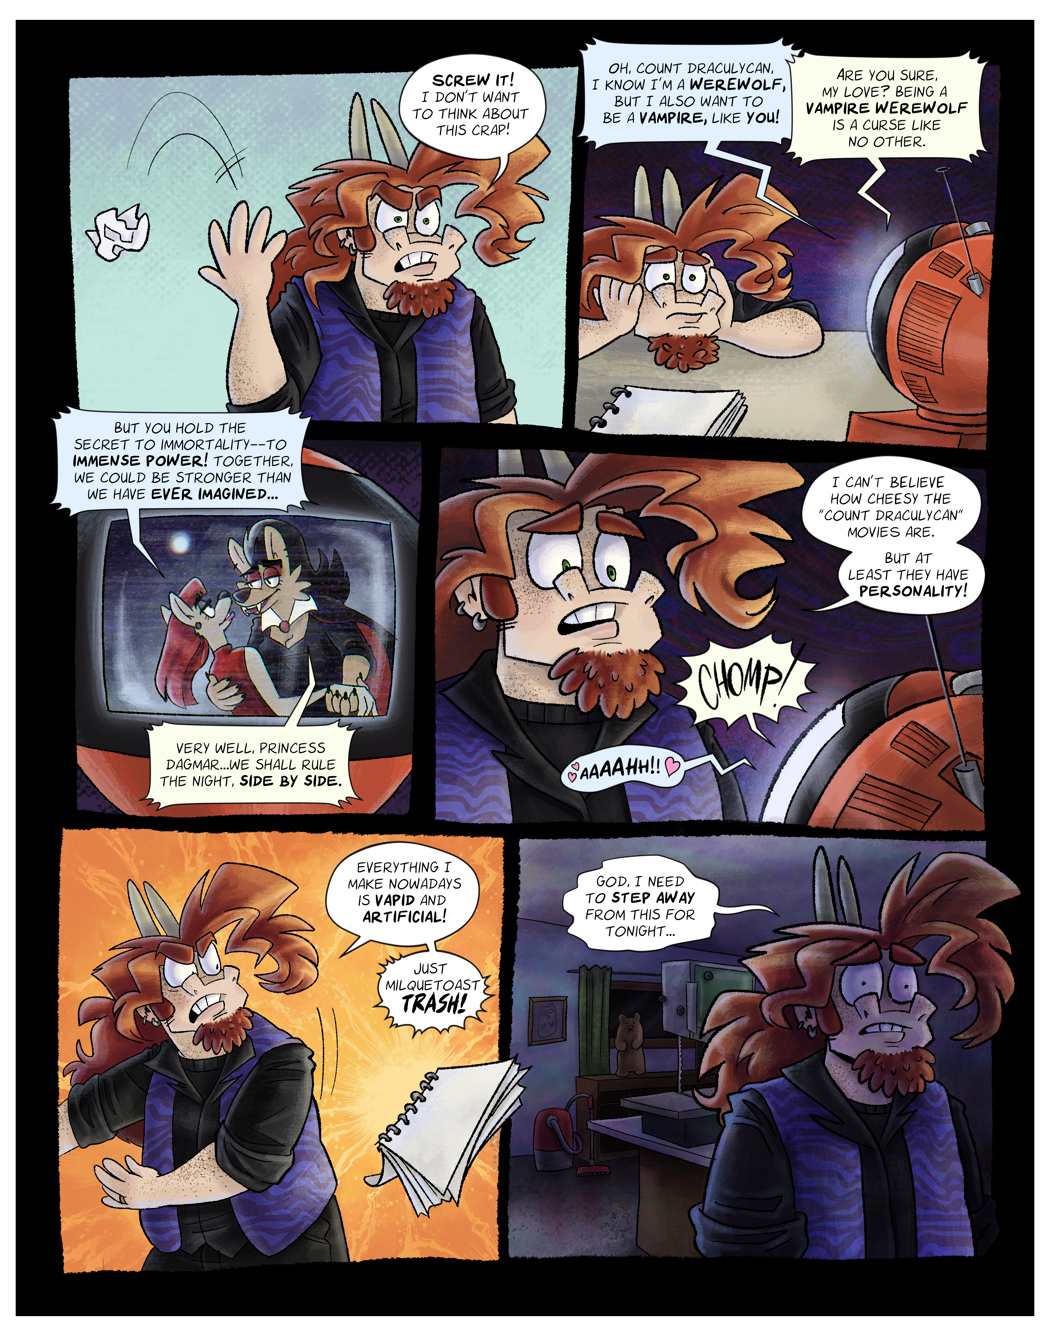 Chapter 3 Page 6: ARGH!